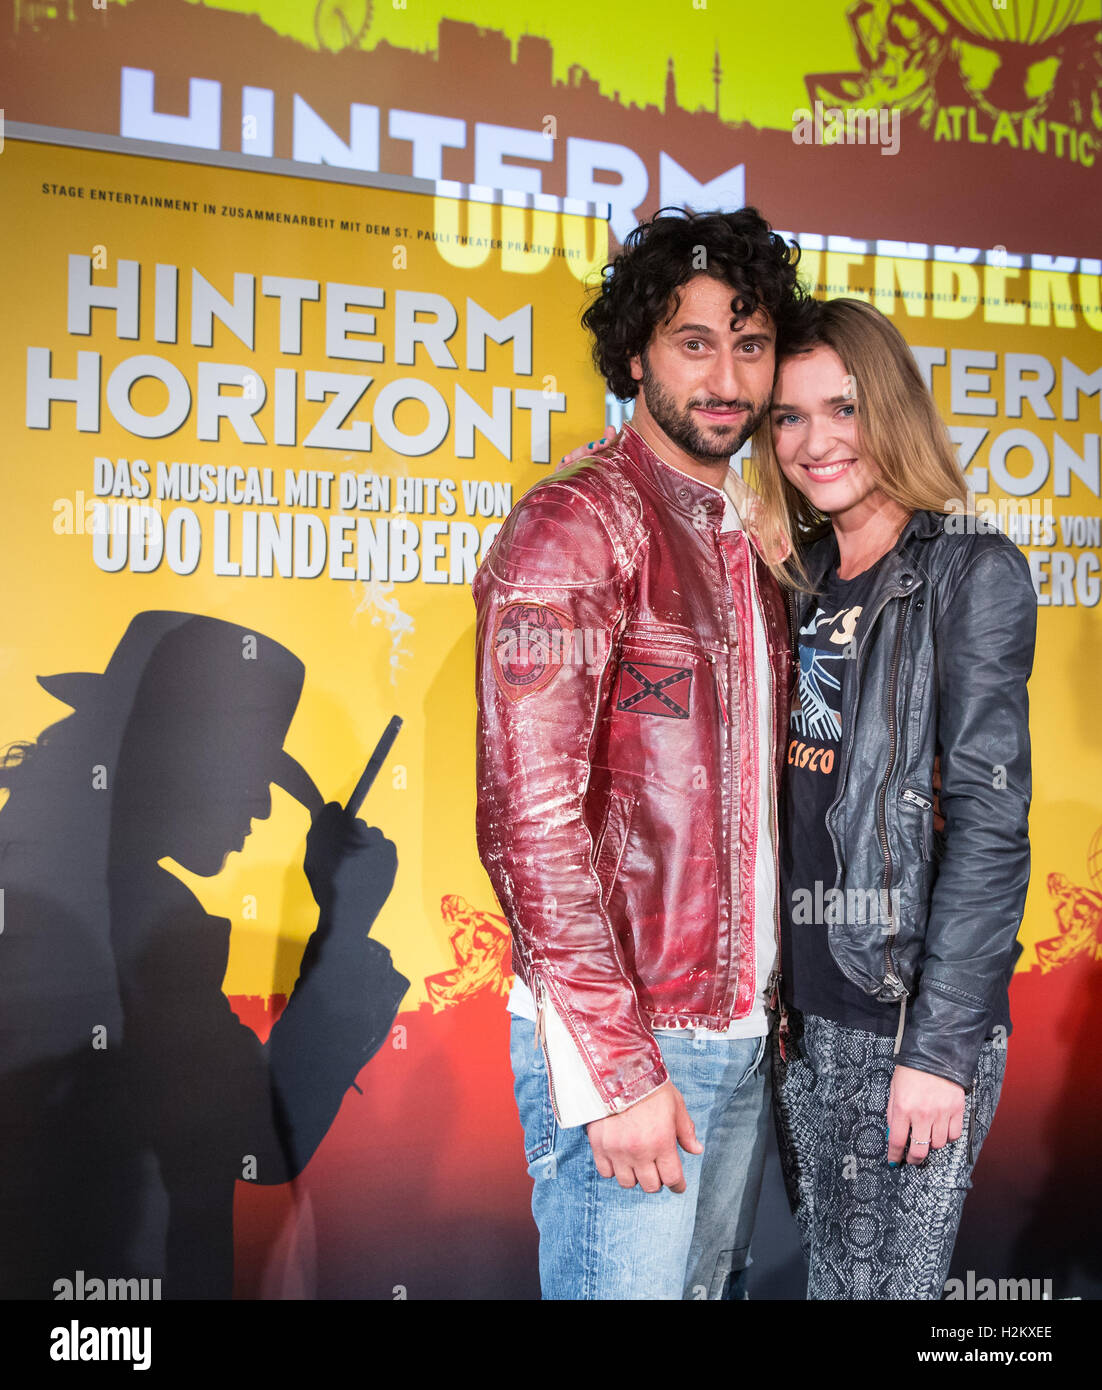 Hamburg, Germany. 29th Sep, 2016. Serkan Kaya (l) who plays Udo Lindenberg,  and Josephin Busch, who plays Jessy the "girl from East Berlin (r),  pictured during a photocall after a press conference